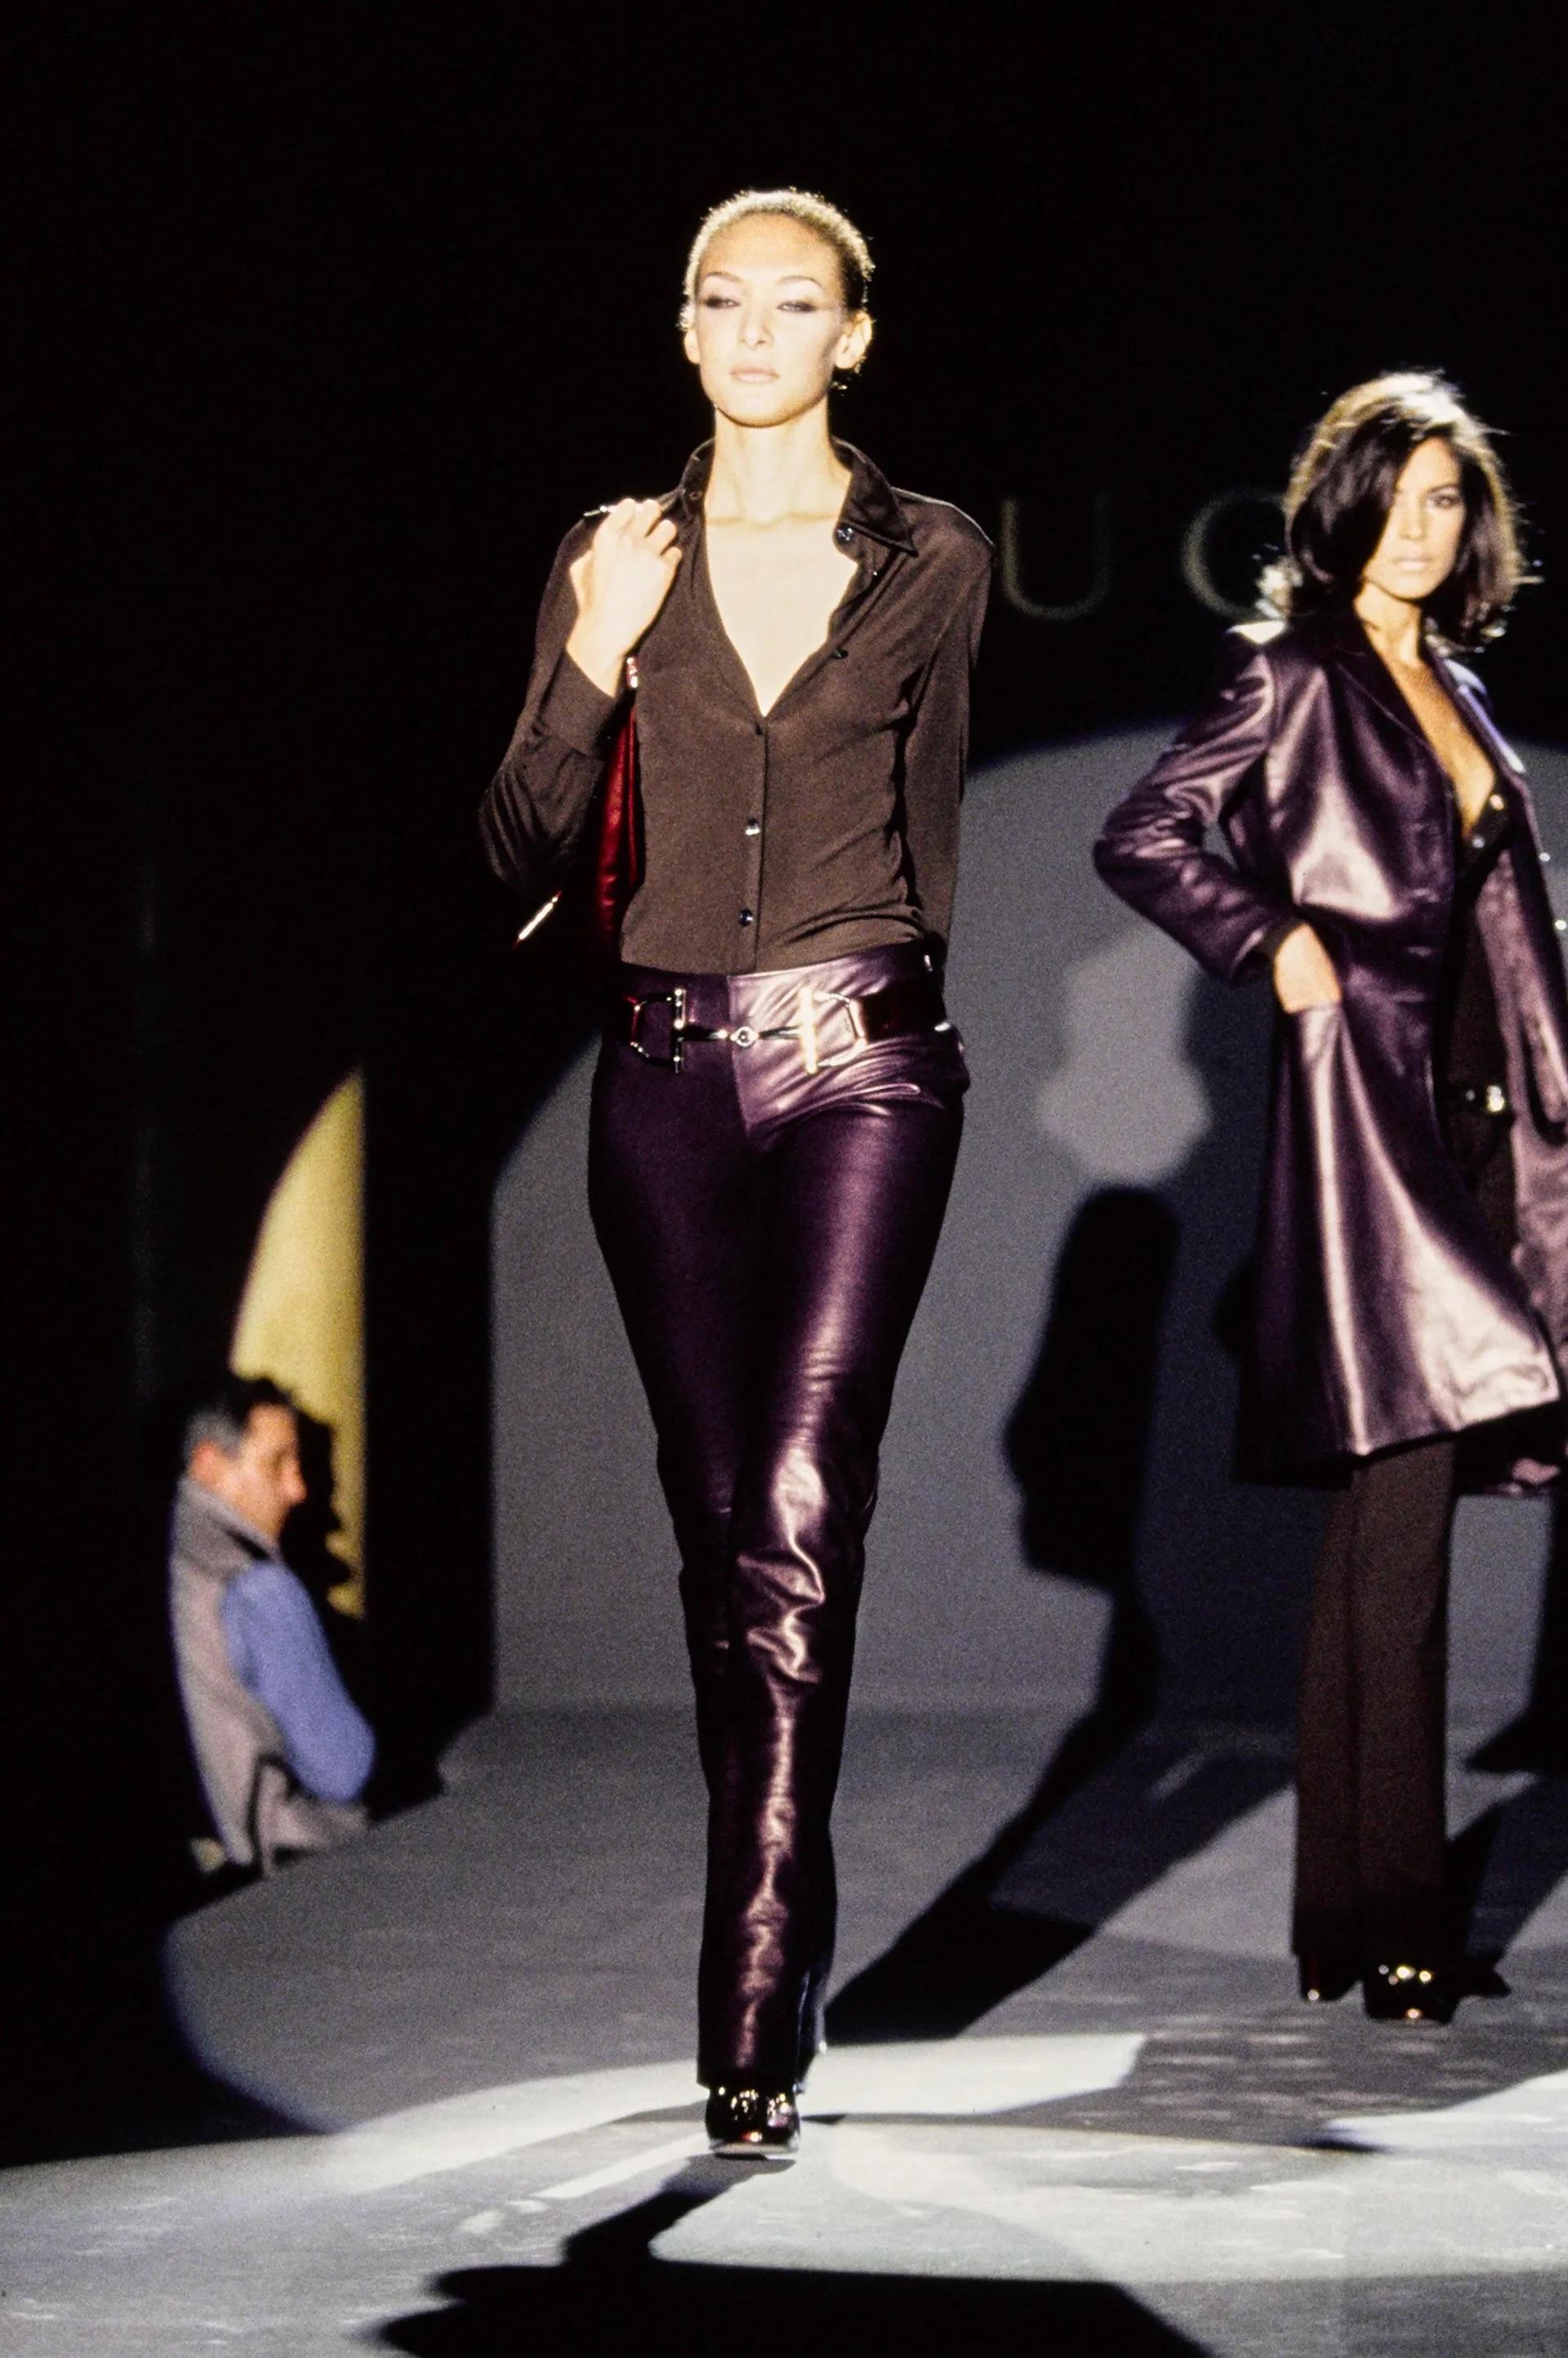 Presenting a stunning red patent leather Gucci belt, designed by Tom Ford. From the Fall/Winter 1995 collection, the larger version of this belt debuted on the season's runway, as part of look 41, modeled by Chrystèle Saint Louis Augustin. A Ford